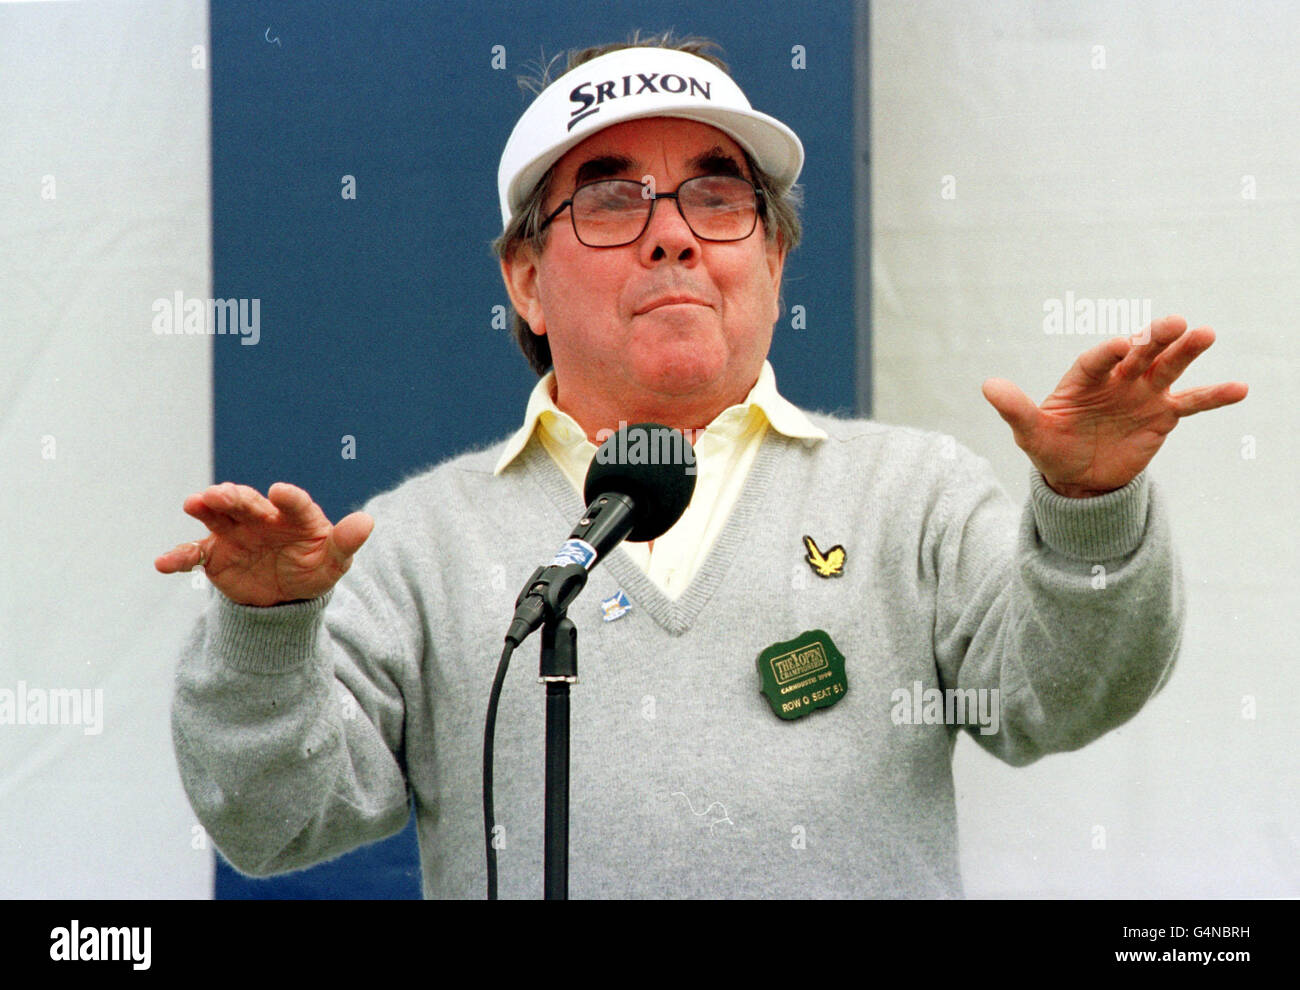 OPEN GOLF/Ronnie Corbett. Golf-loving comedian Ronnie Corbett entertains the crowds at Carnoustie, Scotland, on the eve of the1999 British Open Golf Championship. Stock Photo